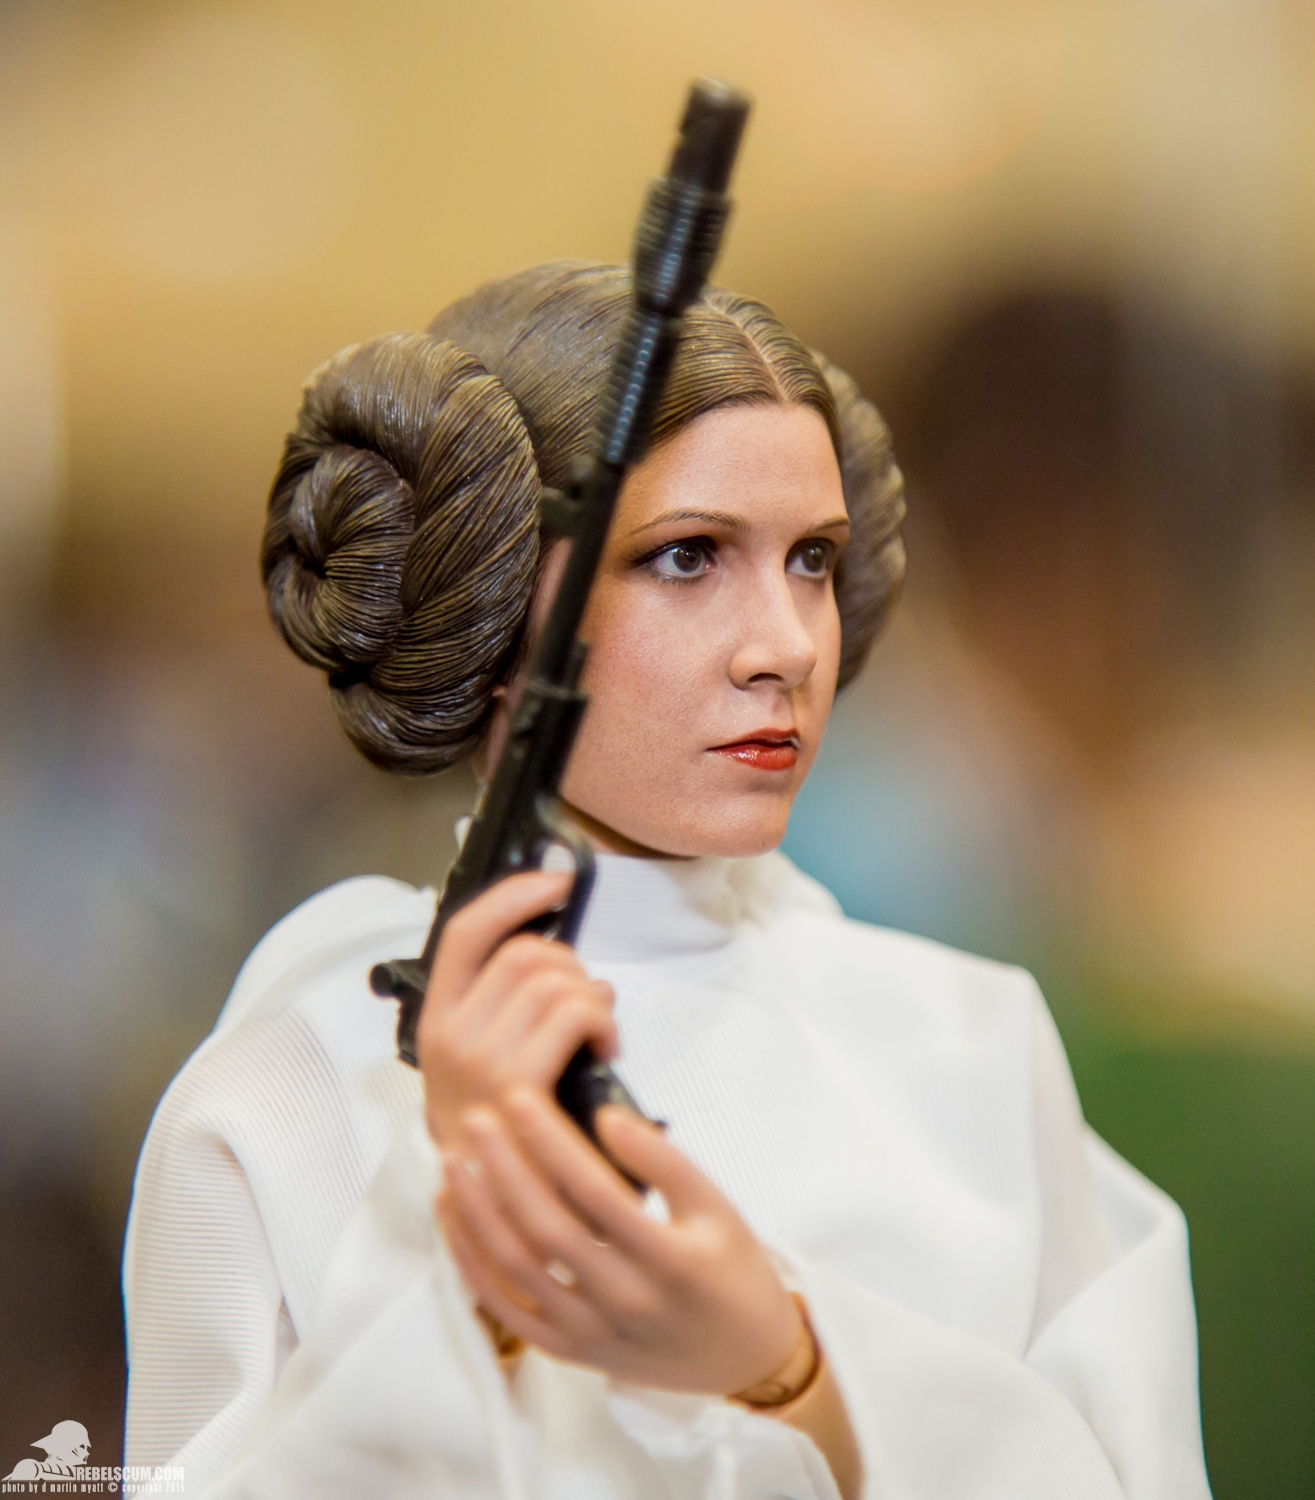 http://www.rebelscum.com/2015-SDCC/Hot-Toys-Display-2015-San-Diego-Comic-Con-SDCC/Hot-Toys-Display-2015-San-Diego-Comic-Con-SDCC-028.jpg